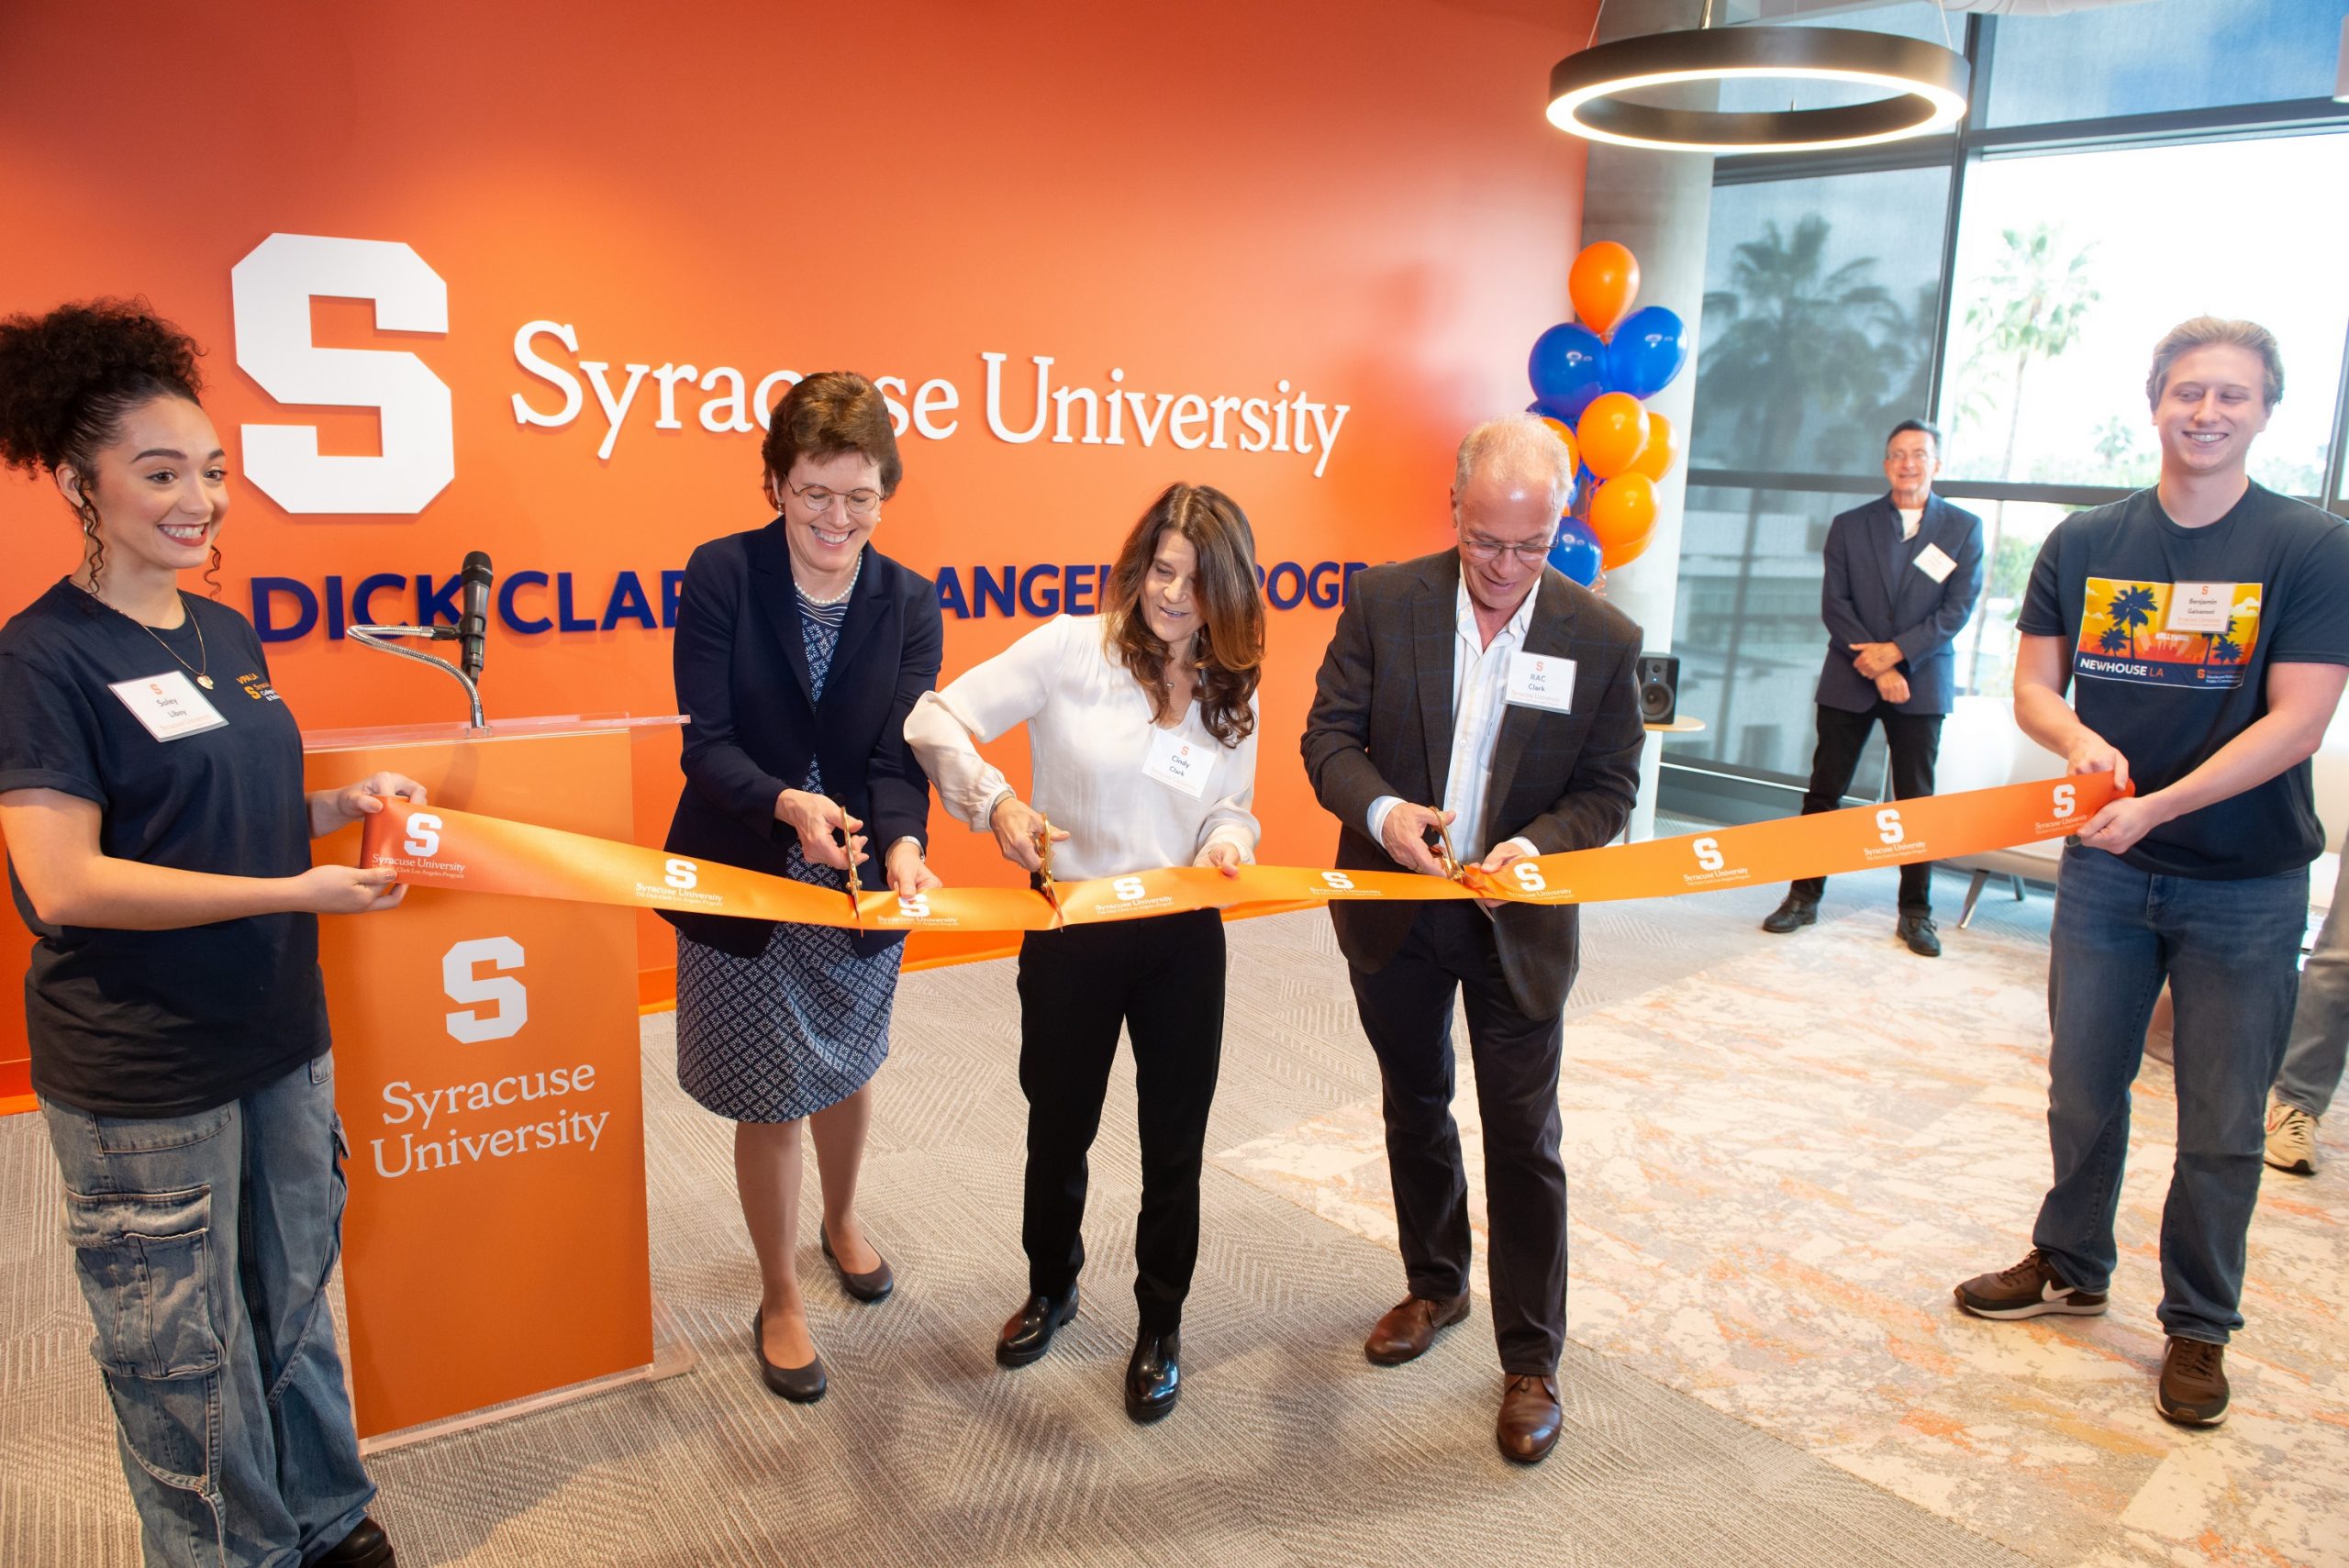 three people cutting ribbon, with two people holding ribbon at ends